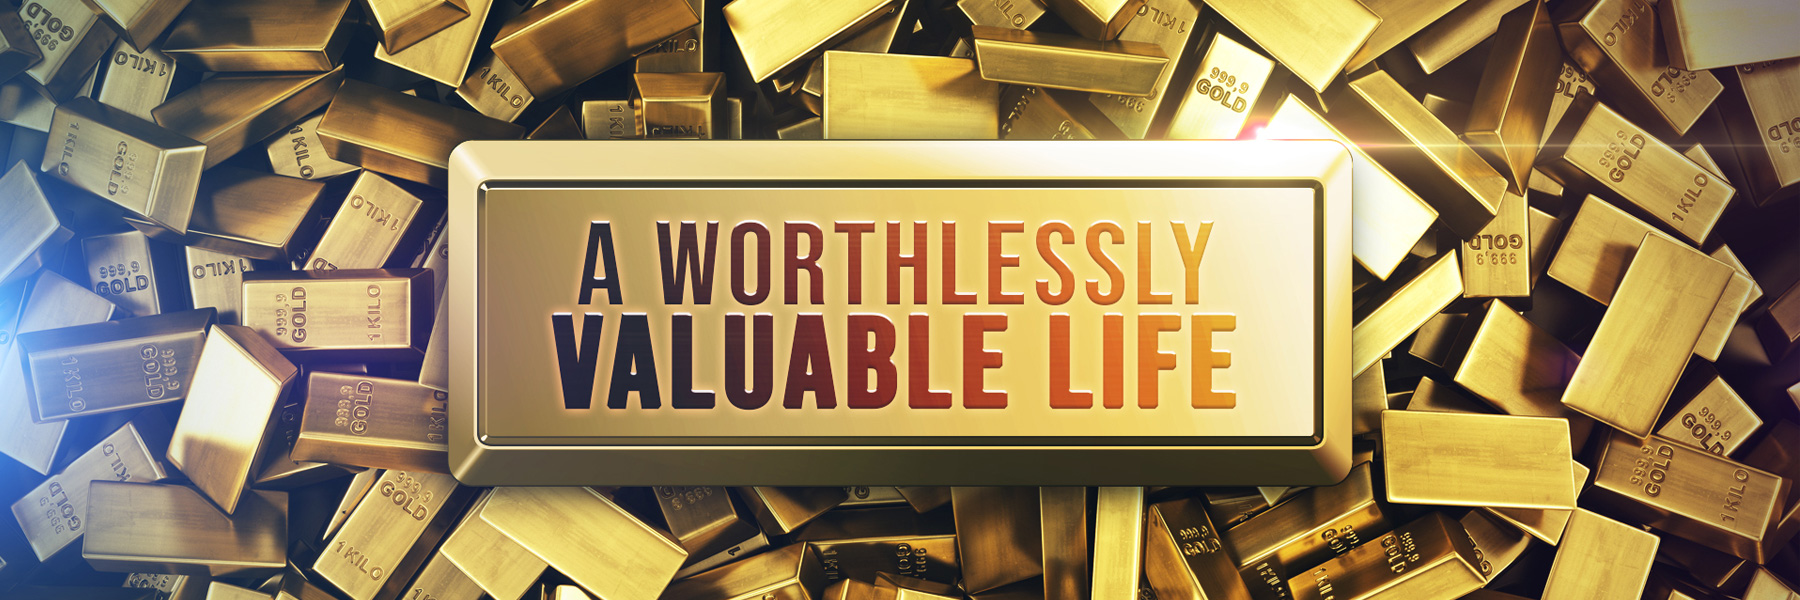 A Worthlessly Valuable Life